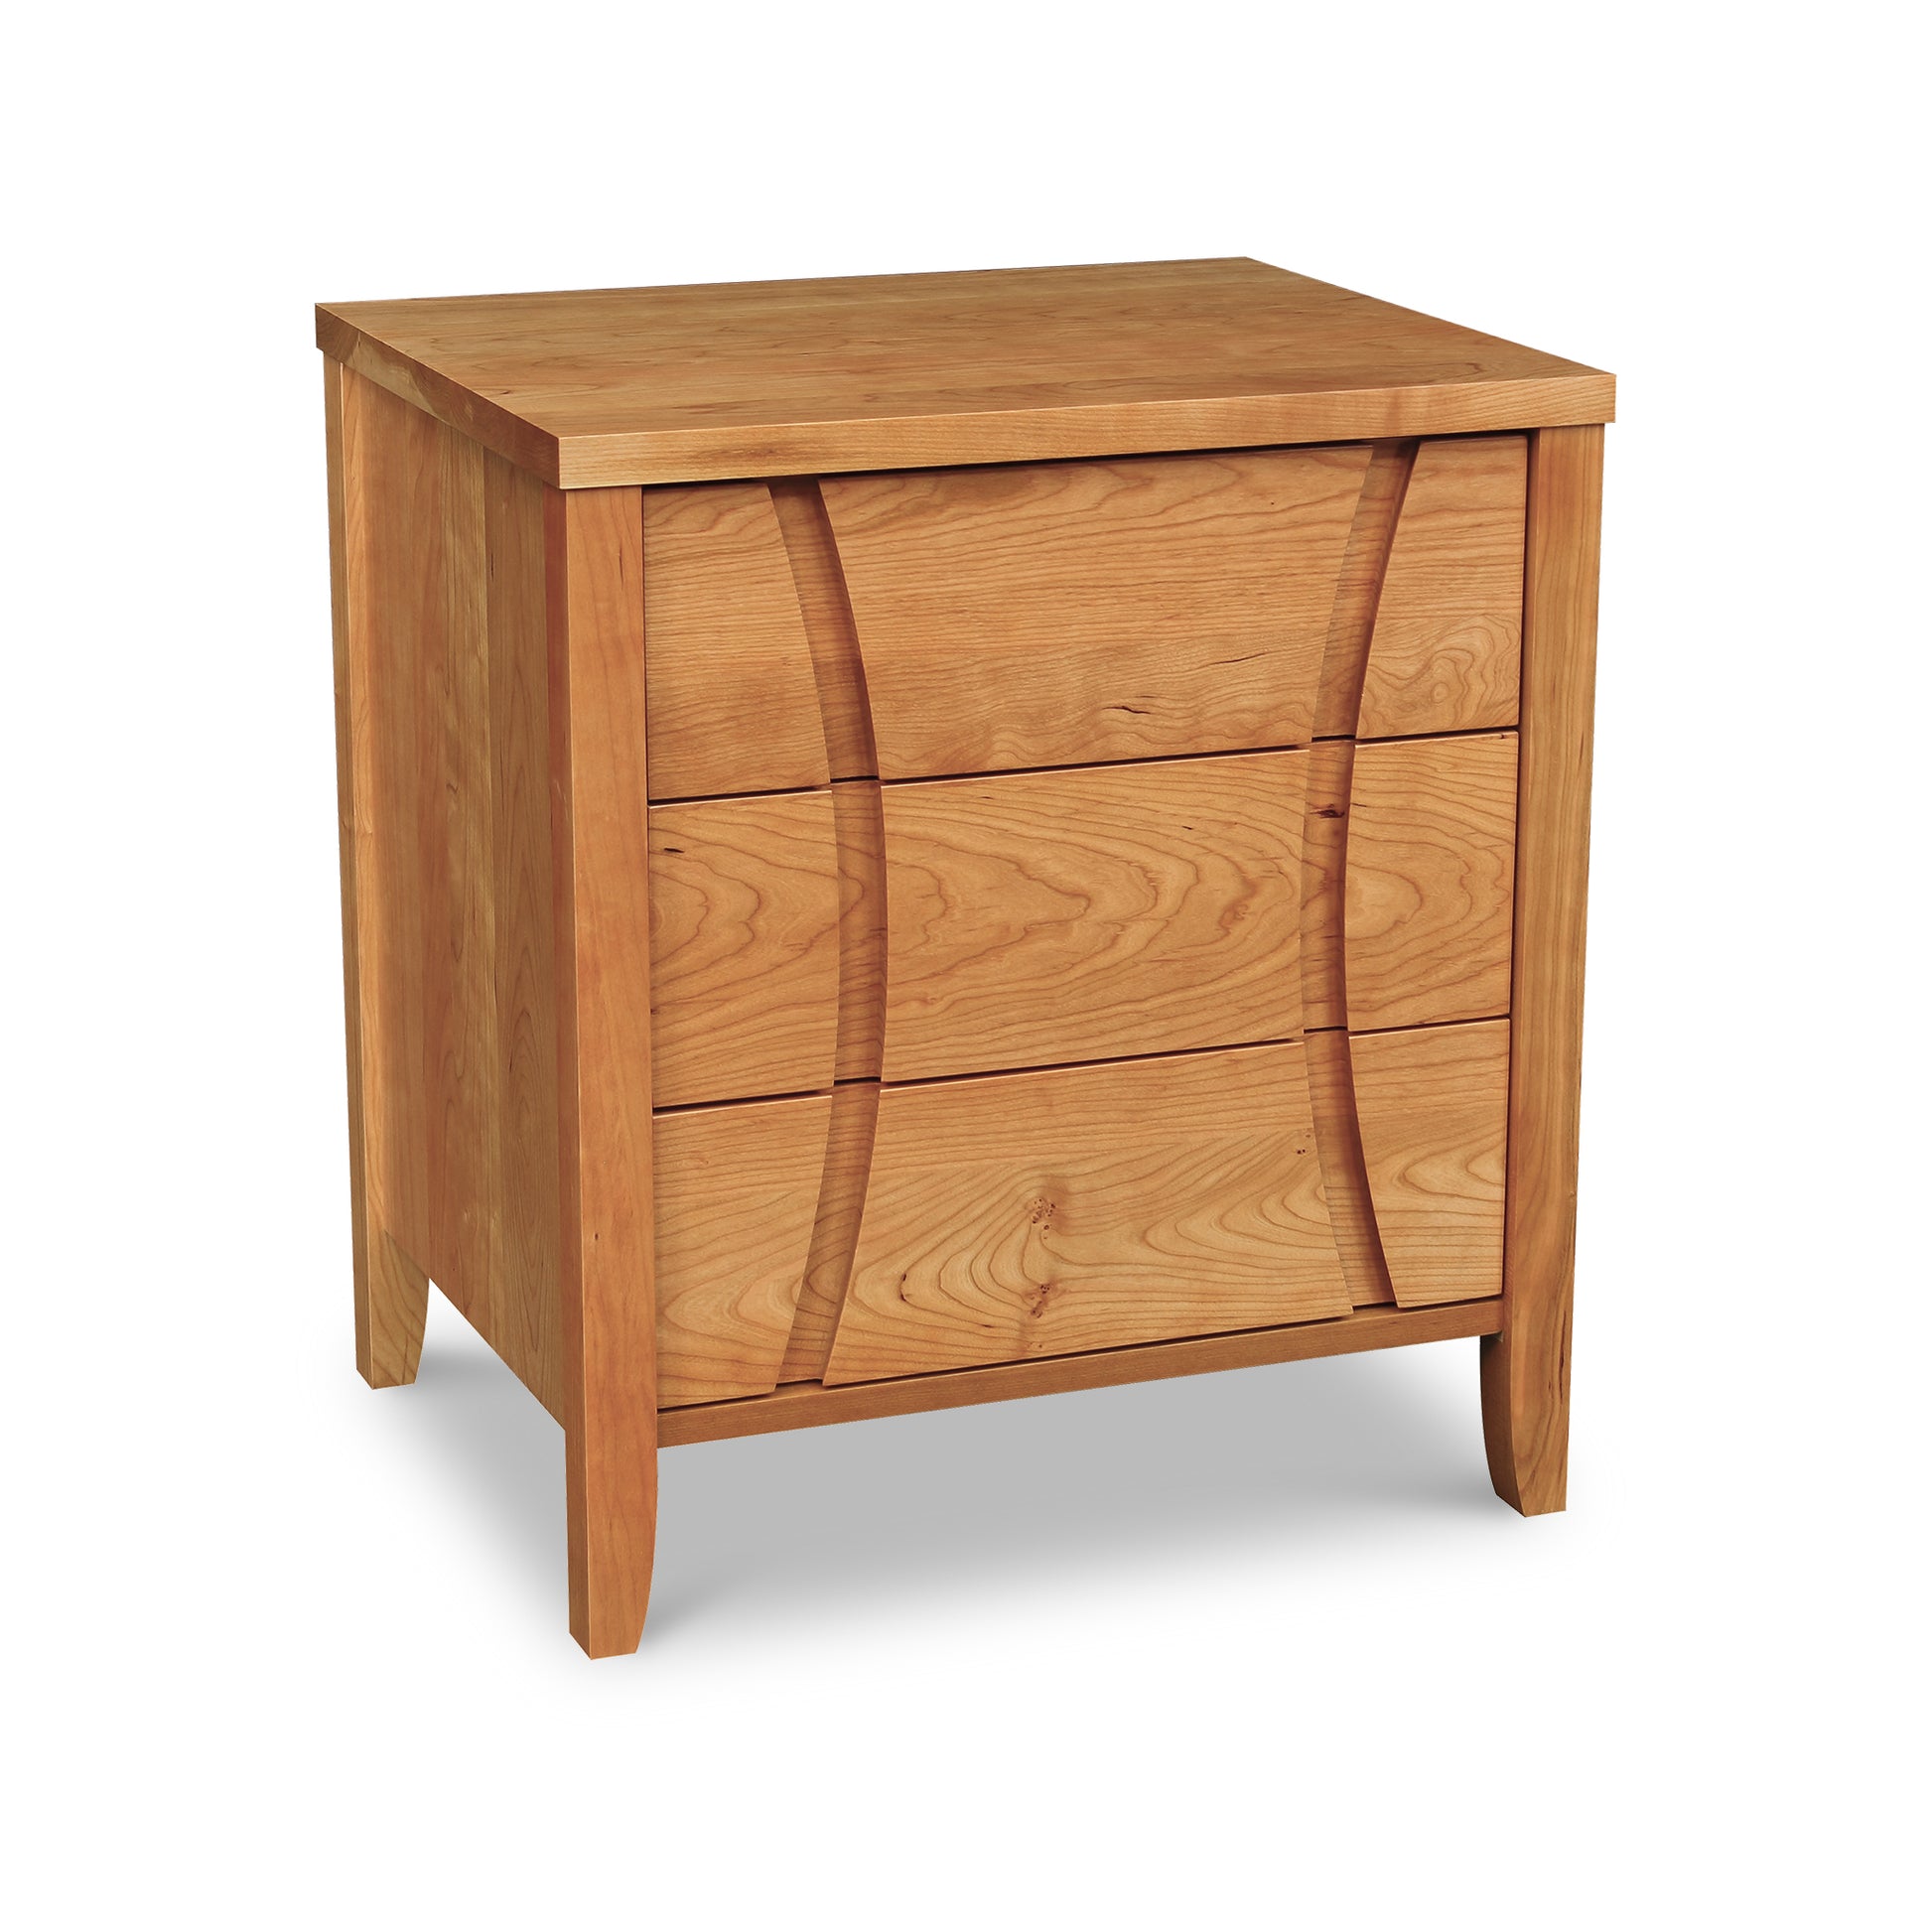 A Lyndon Furniture hardwood Holland 3-Drawer Nightstand, perfect for any bedroom.